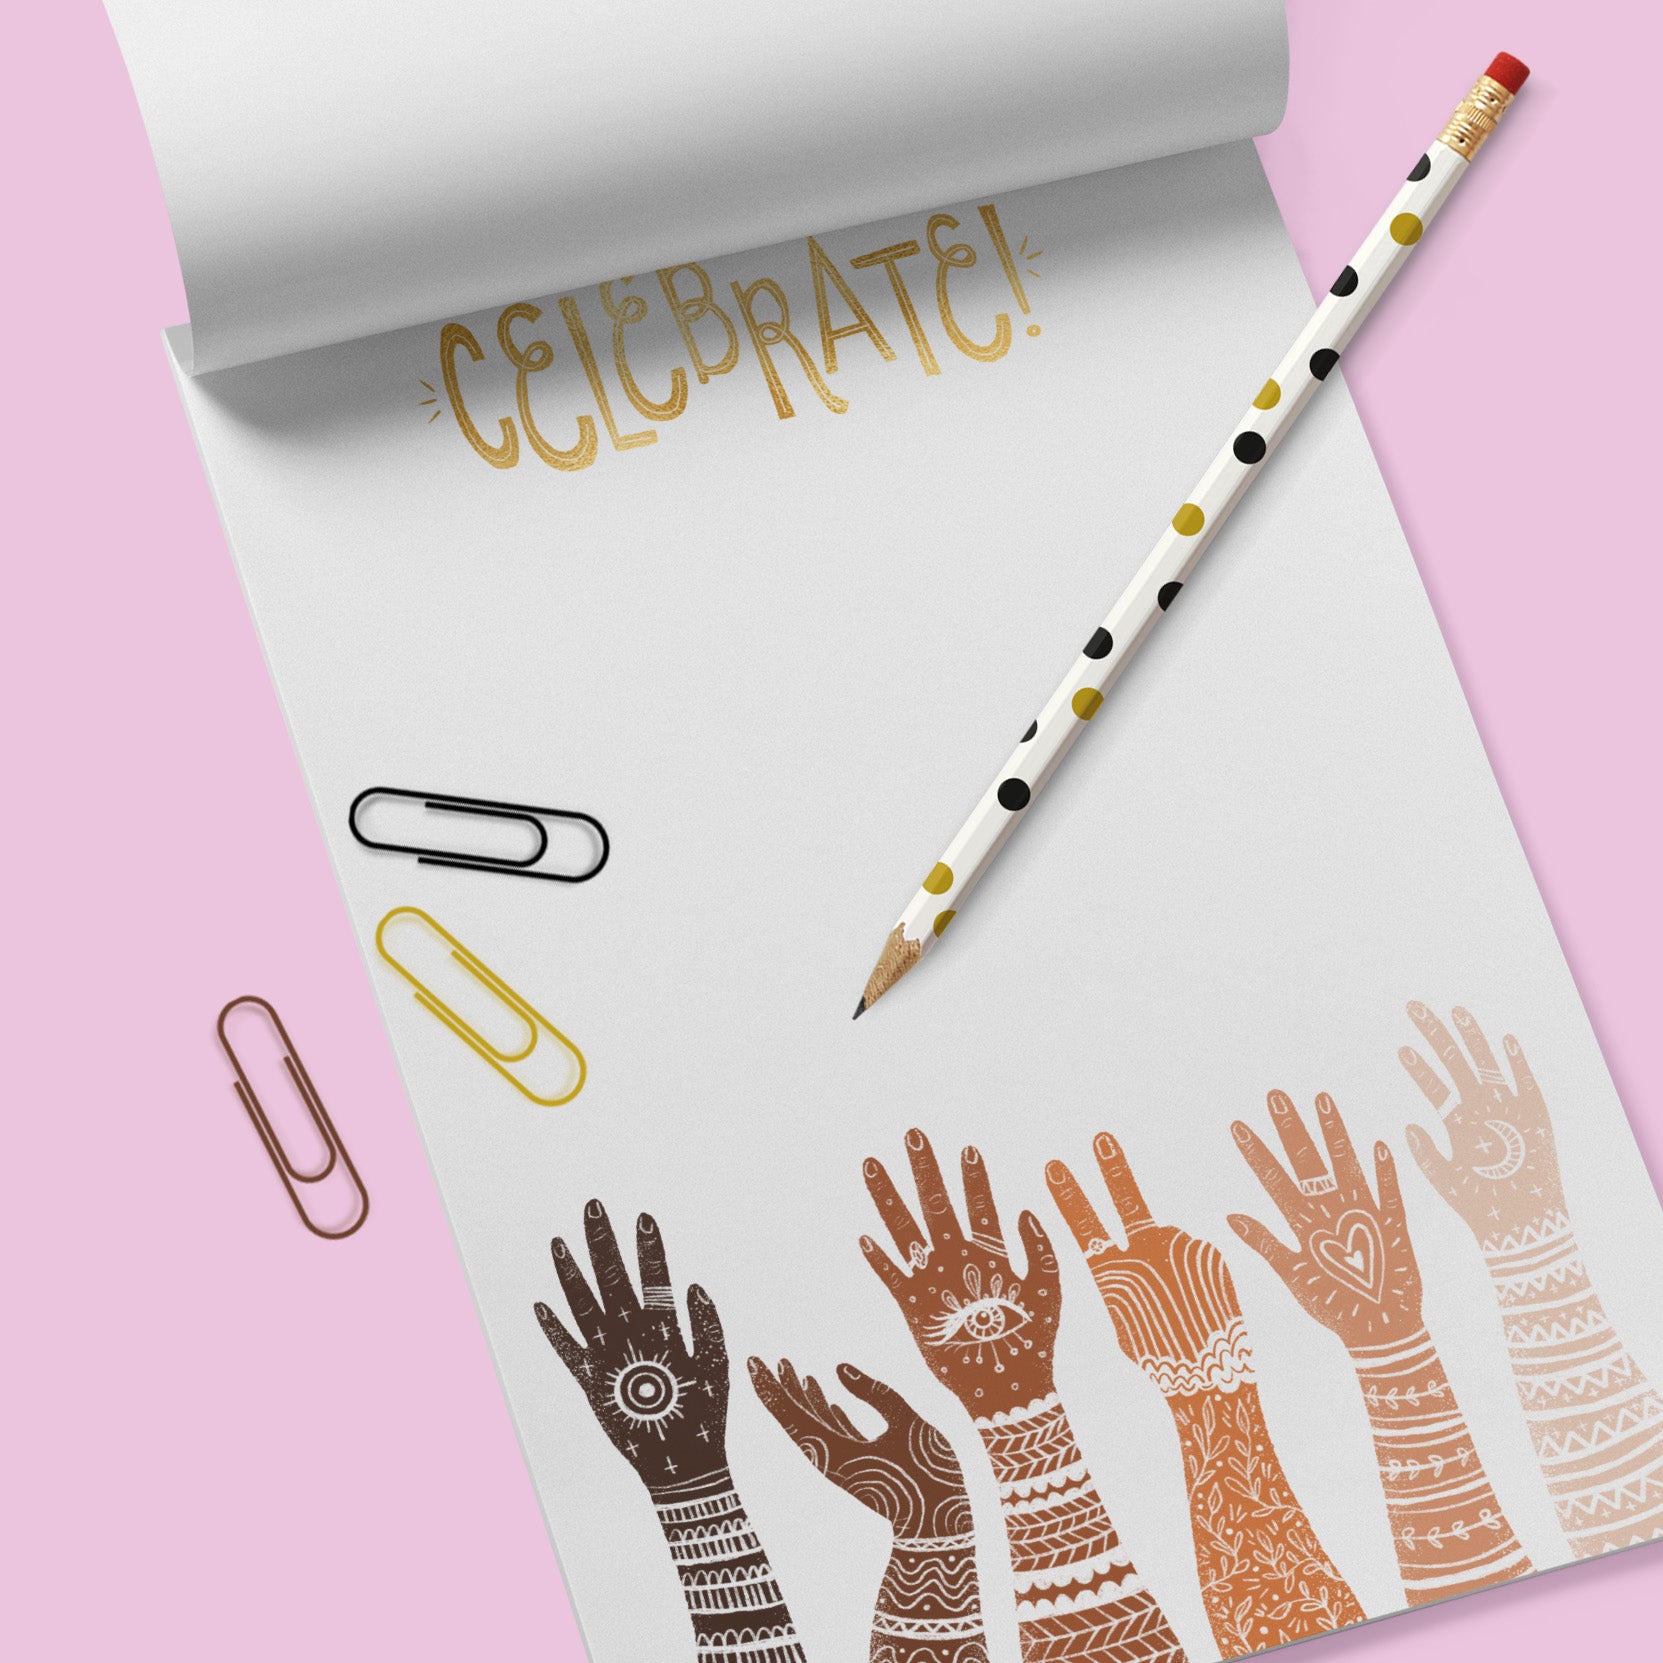 White note pad with diverse multi racially colored hands with arms extended up. the word Celebrate is at the top. Notepad sits on a lavender colored background.